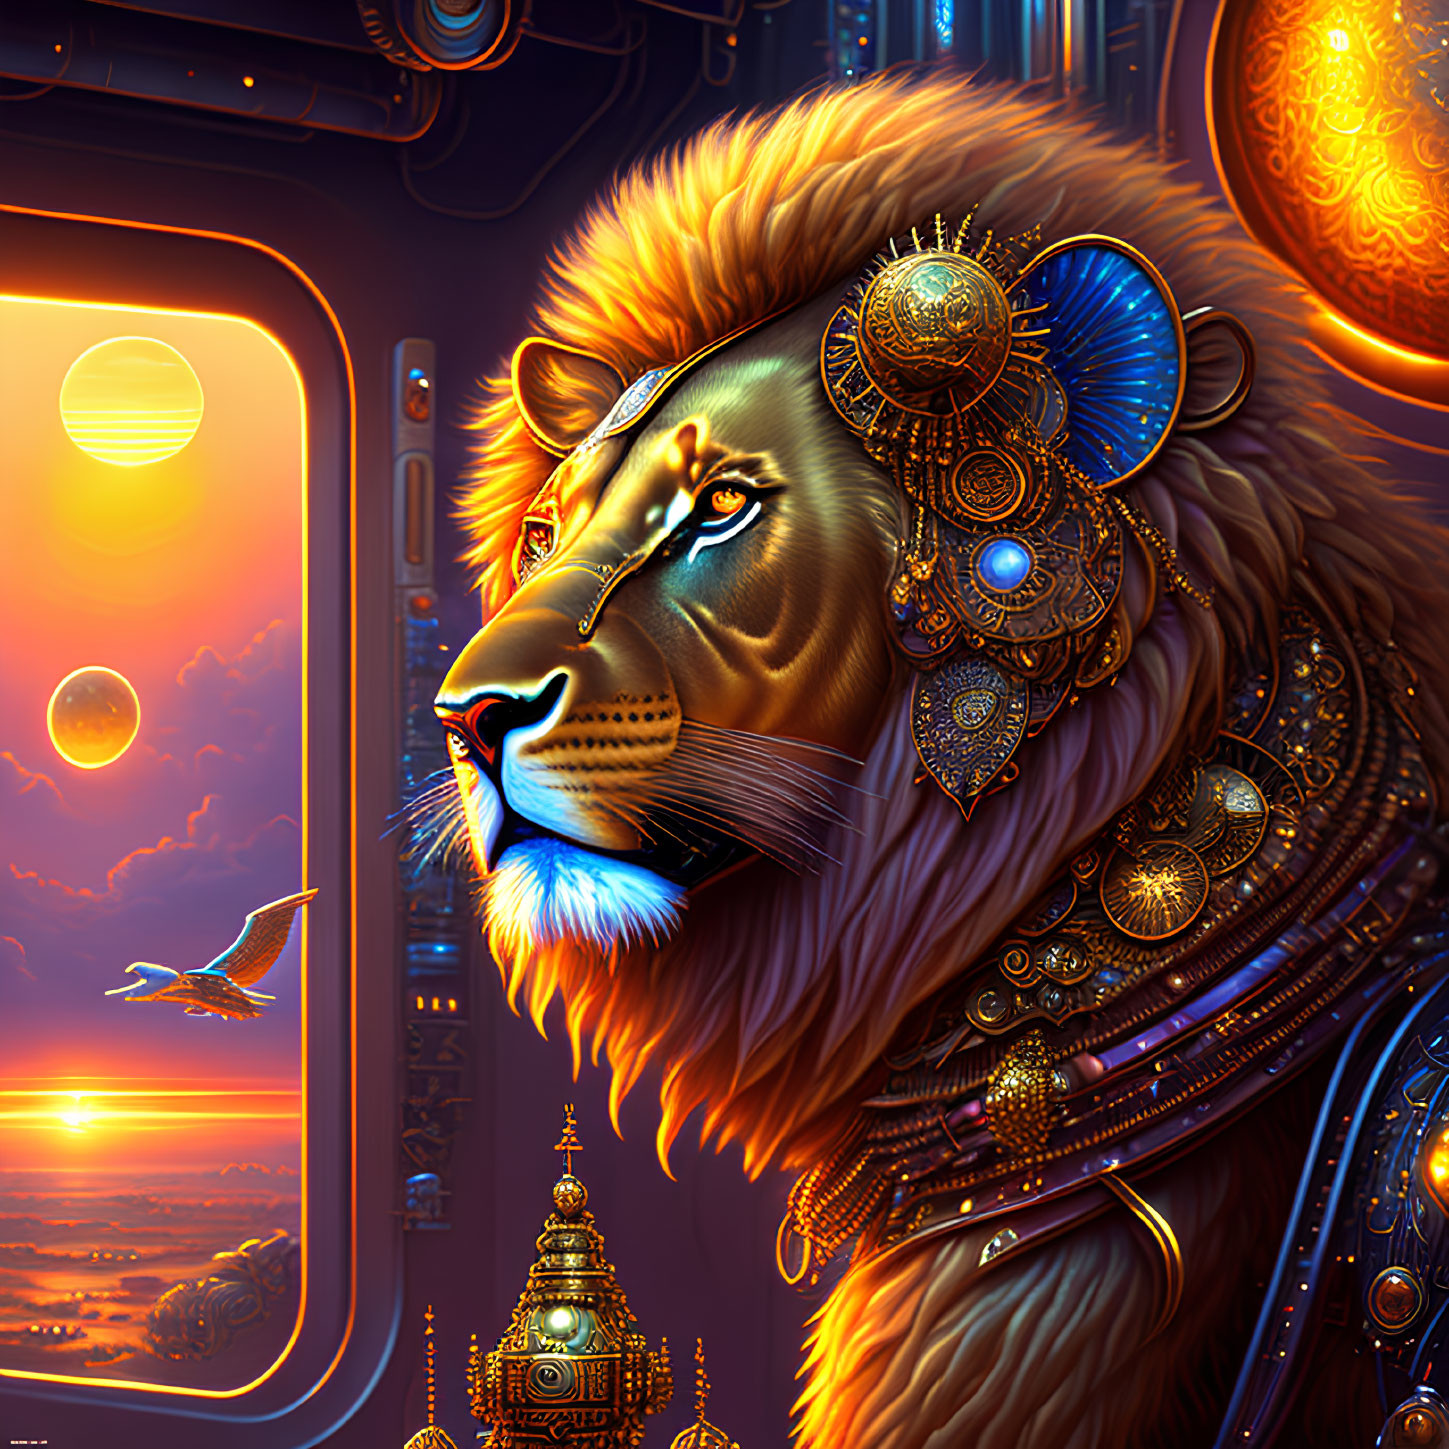 Ornately Decorated Lion with Glowing Golden Mane Views Alien Sunset